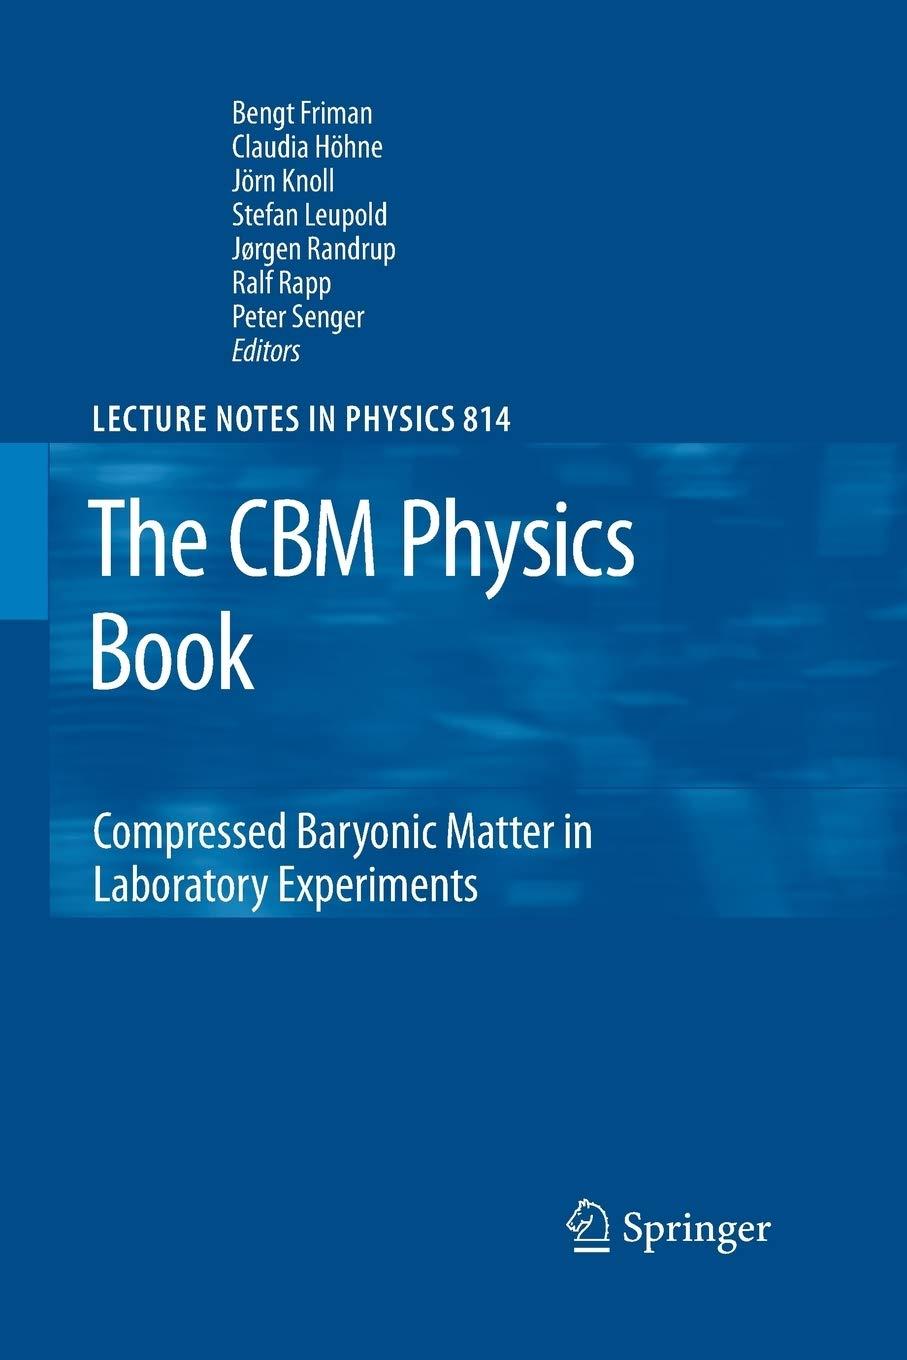 the cbm physics book compressed baryonic matter in laboratory experiments 1st edition bengt friman, claudia